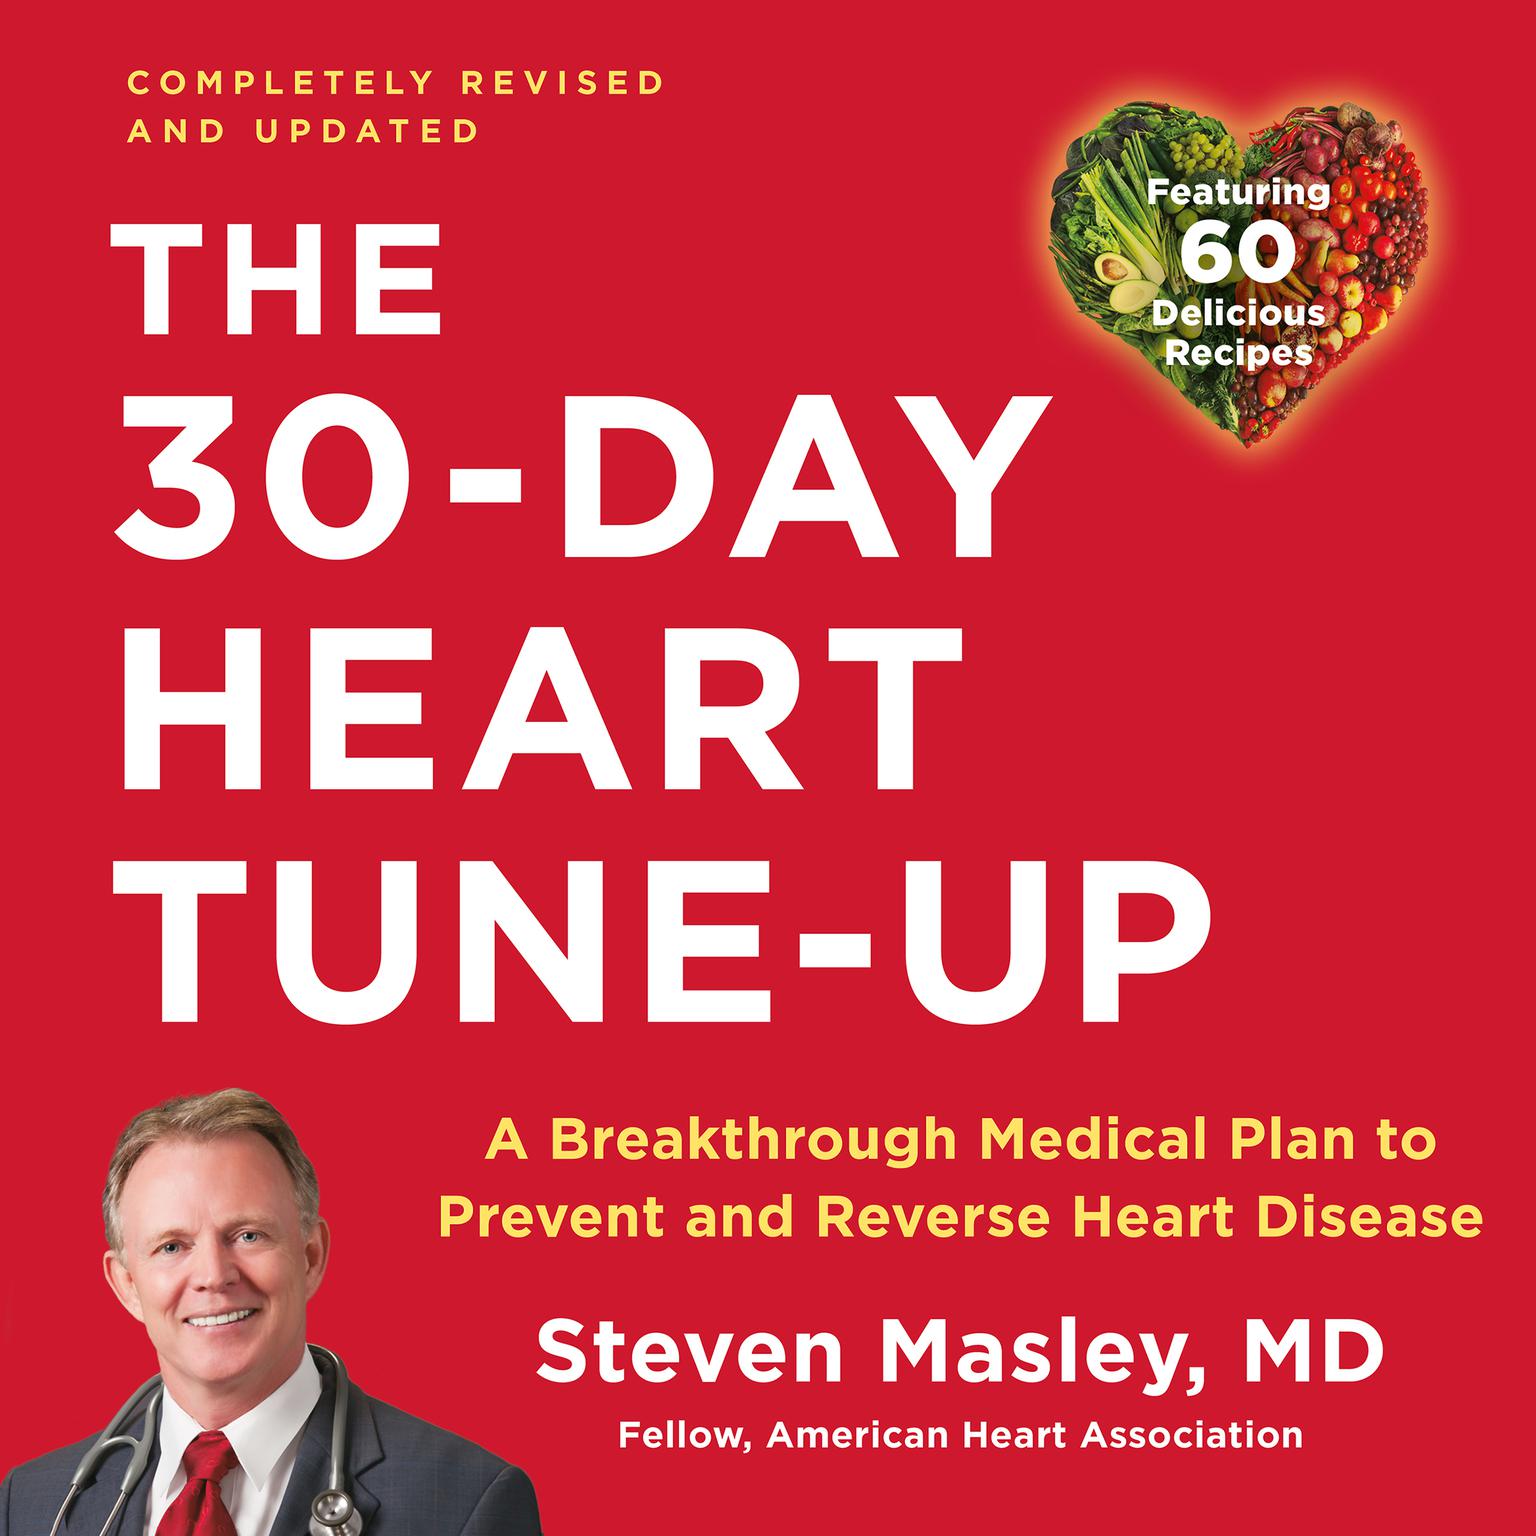 30-Day Heart Tune-Up: A Breakthrough Medical Plan to Prevent and Reverse Heart Disease Audiobook, by Steven Masley